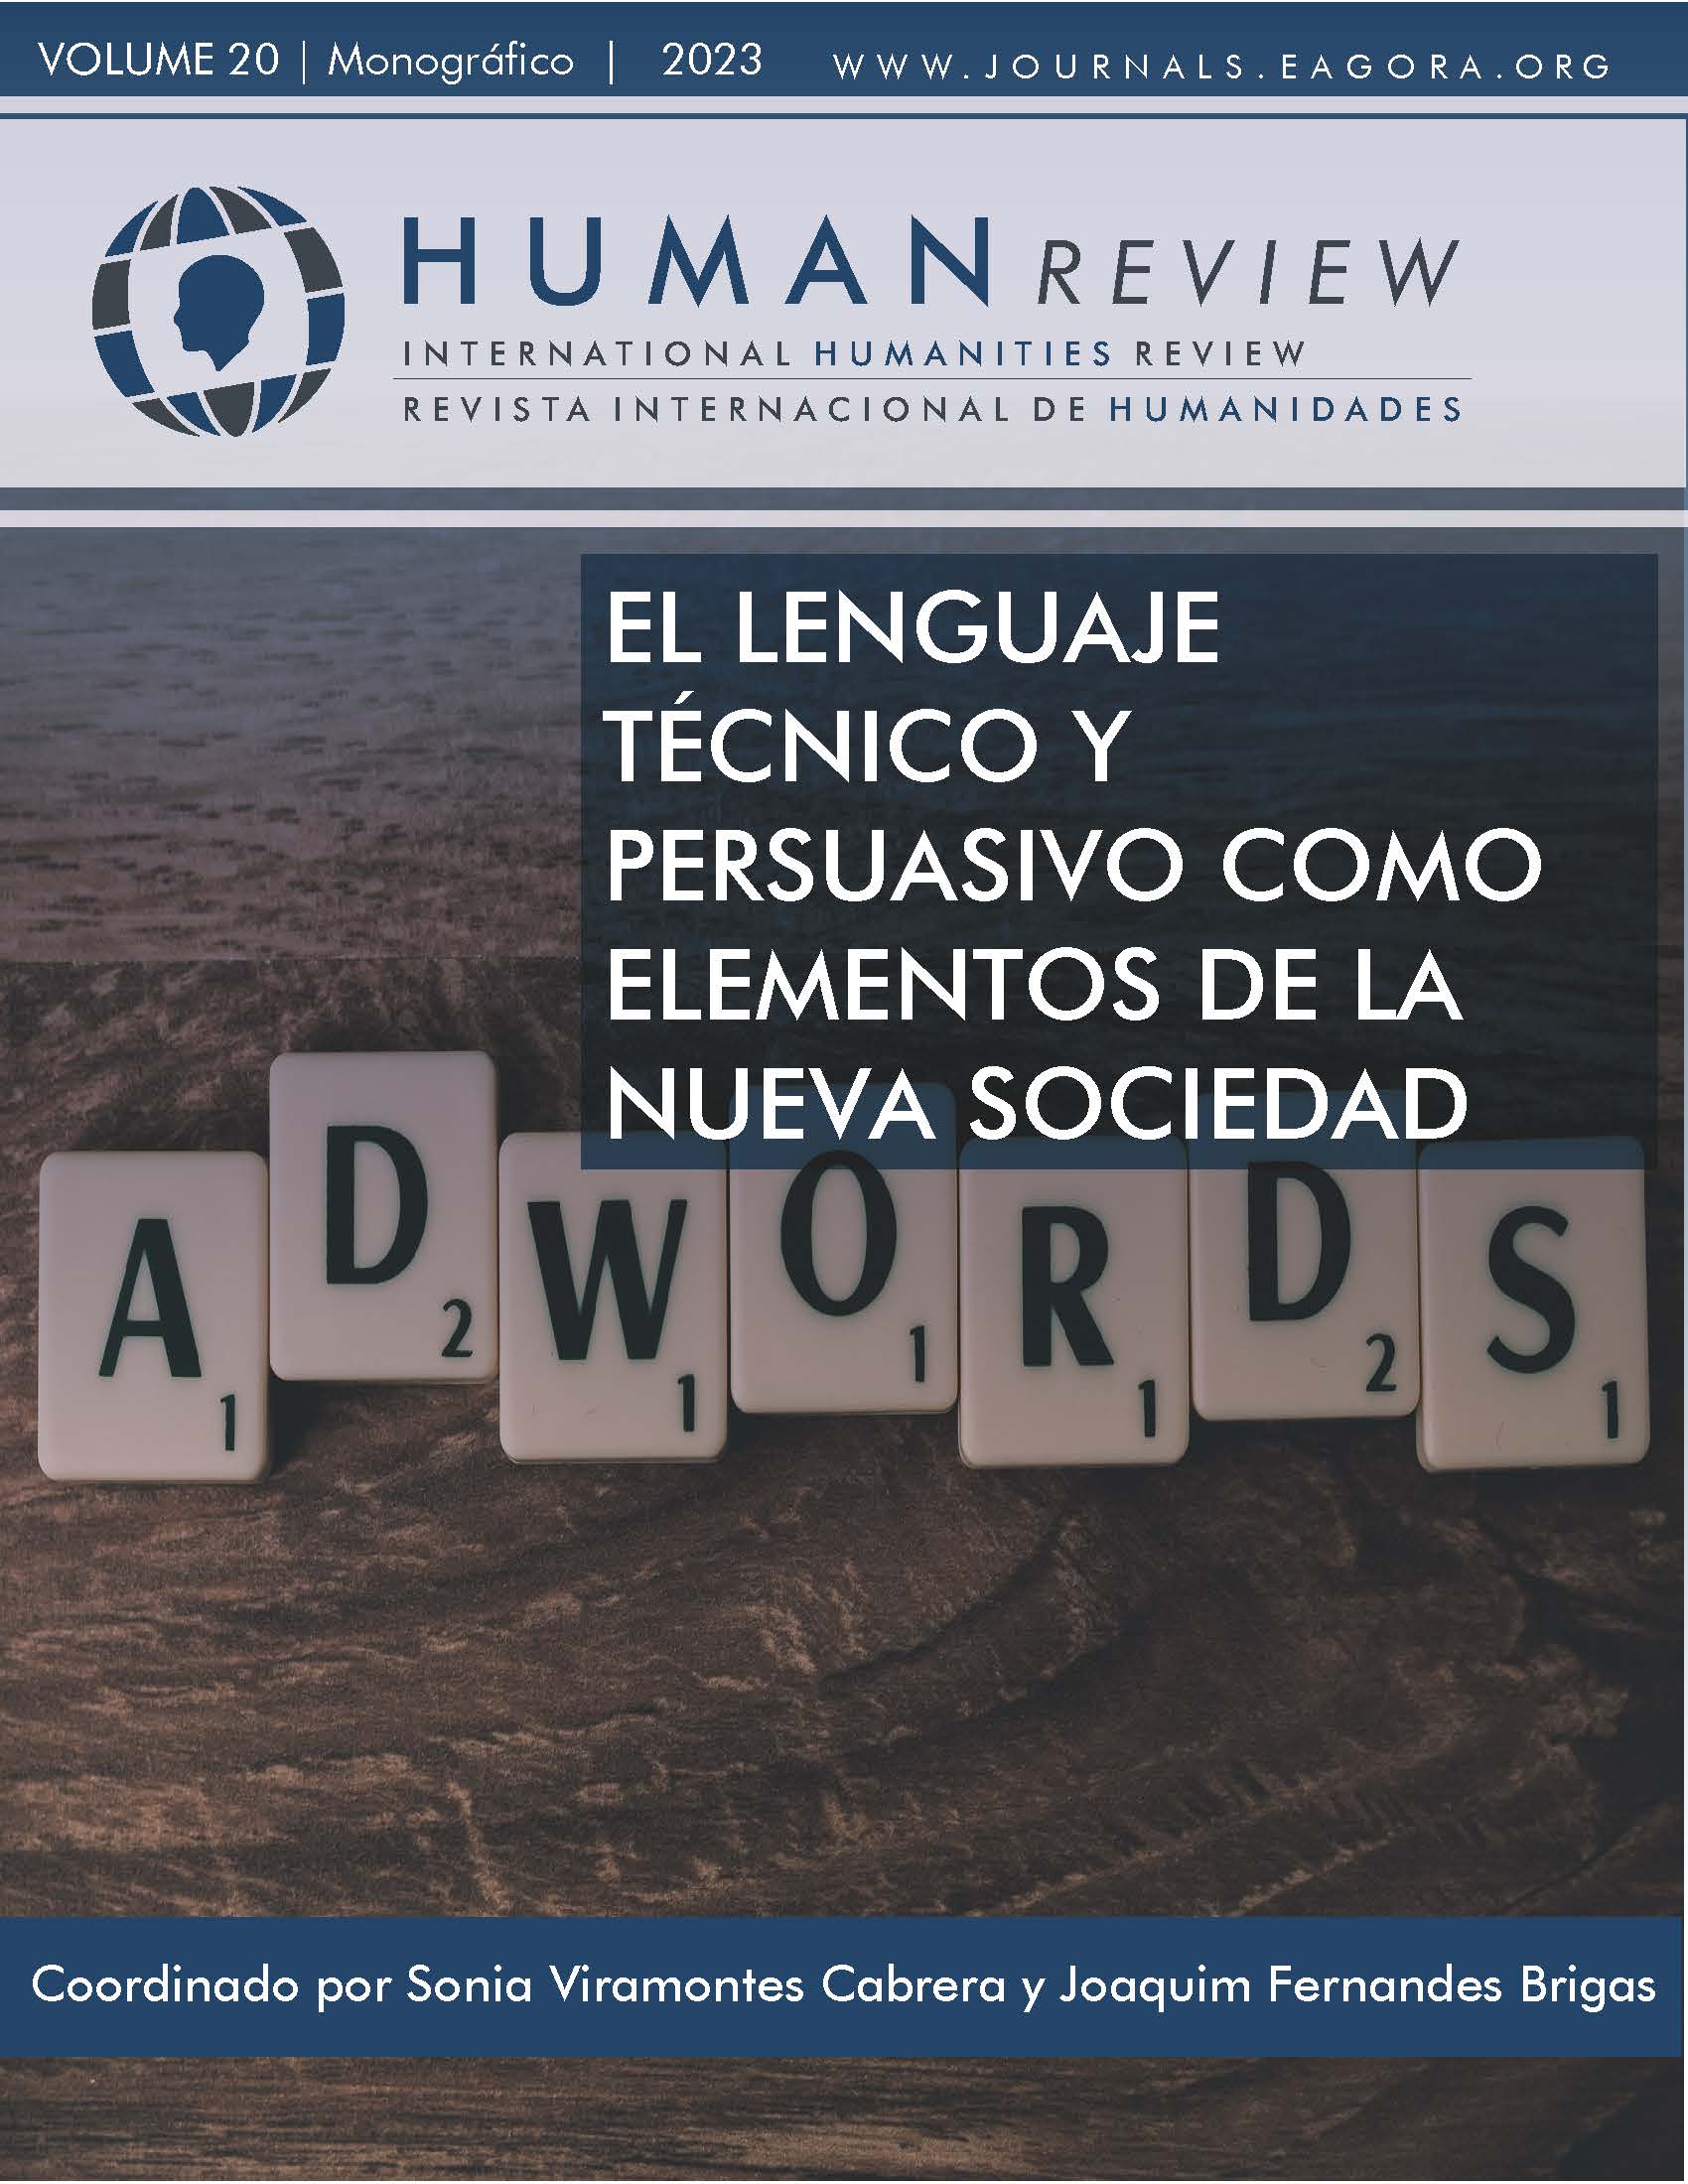 					View Vol. 20 No. 5 (2023): Monograph: "Technical and persuasive language as elements of the new society"
				